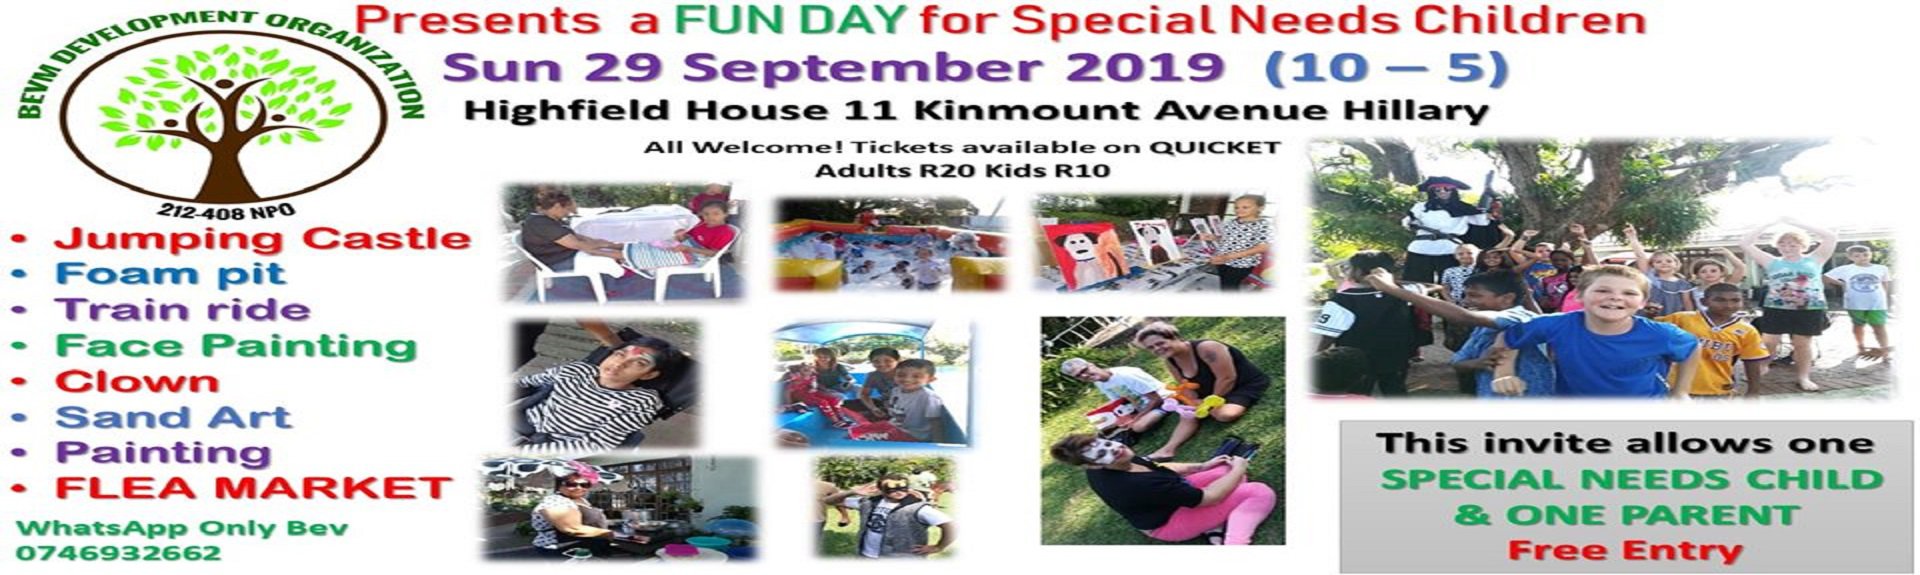 Fun Day for Special Needs kids